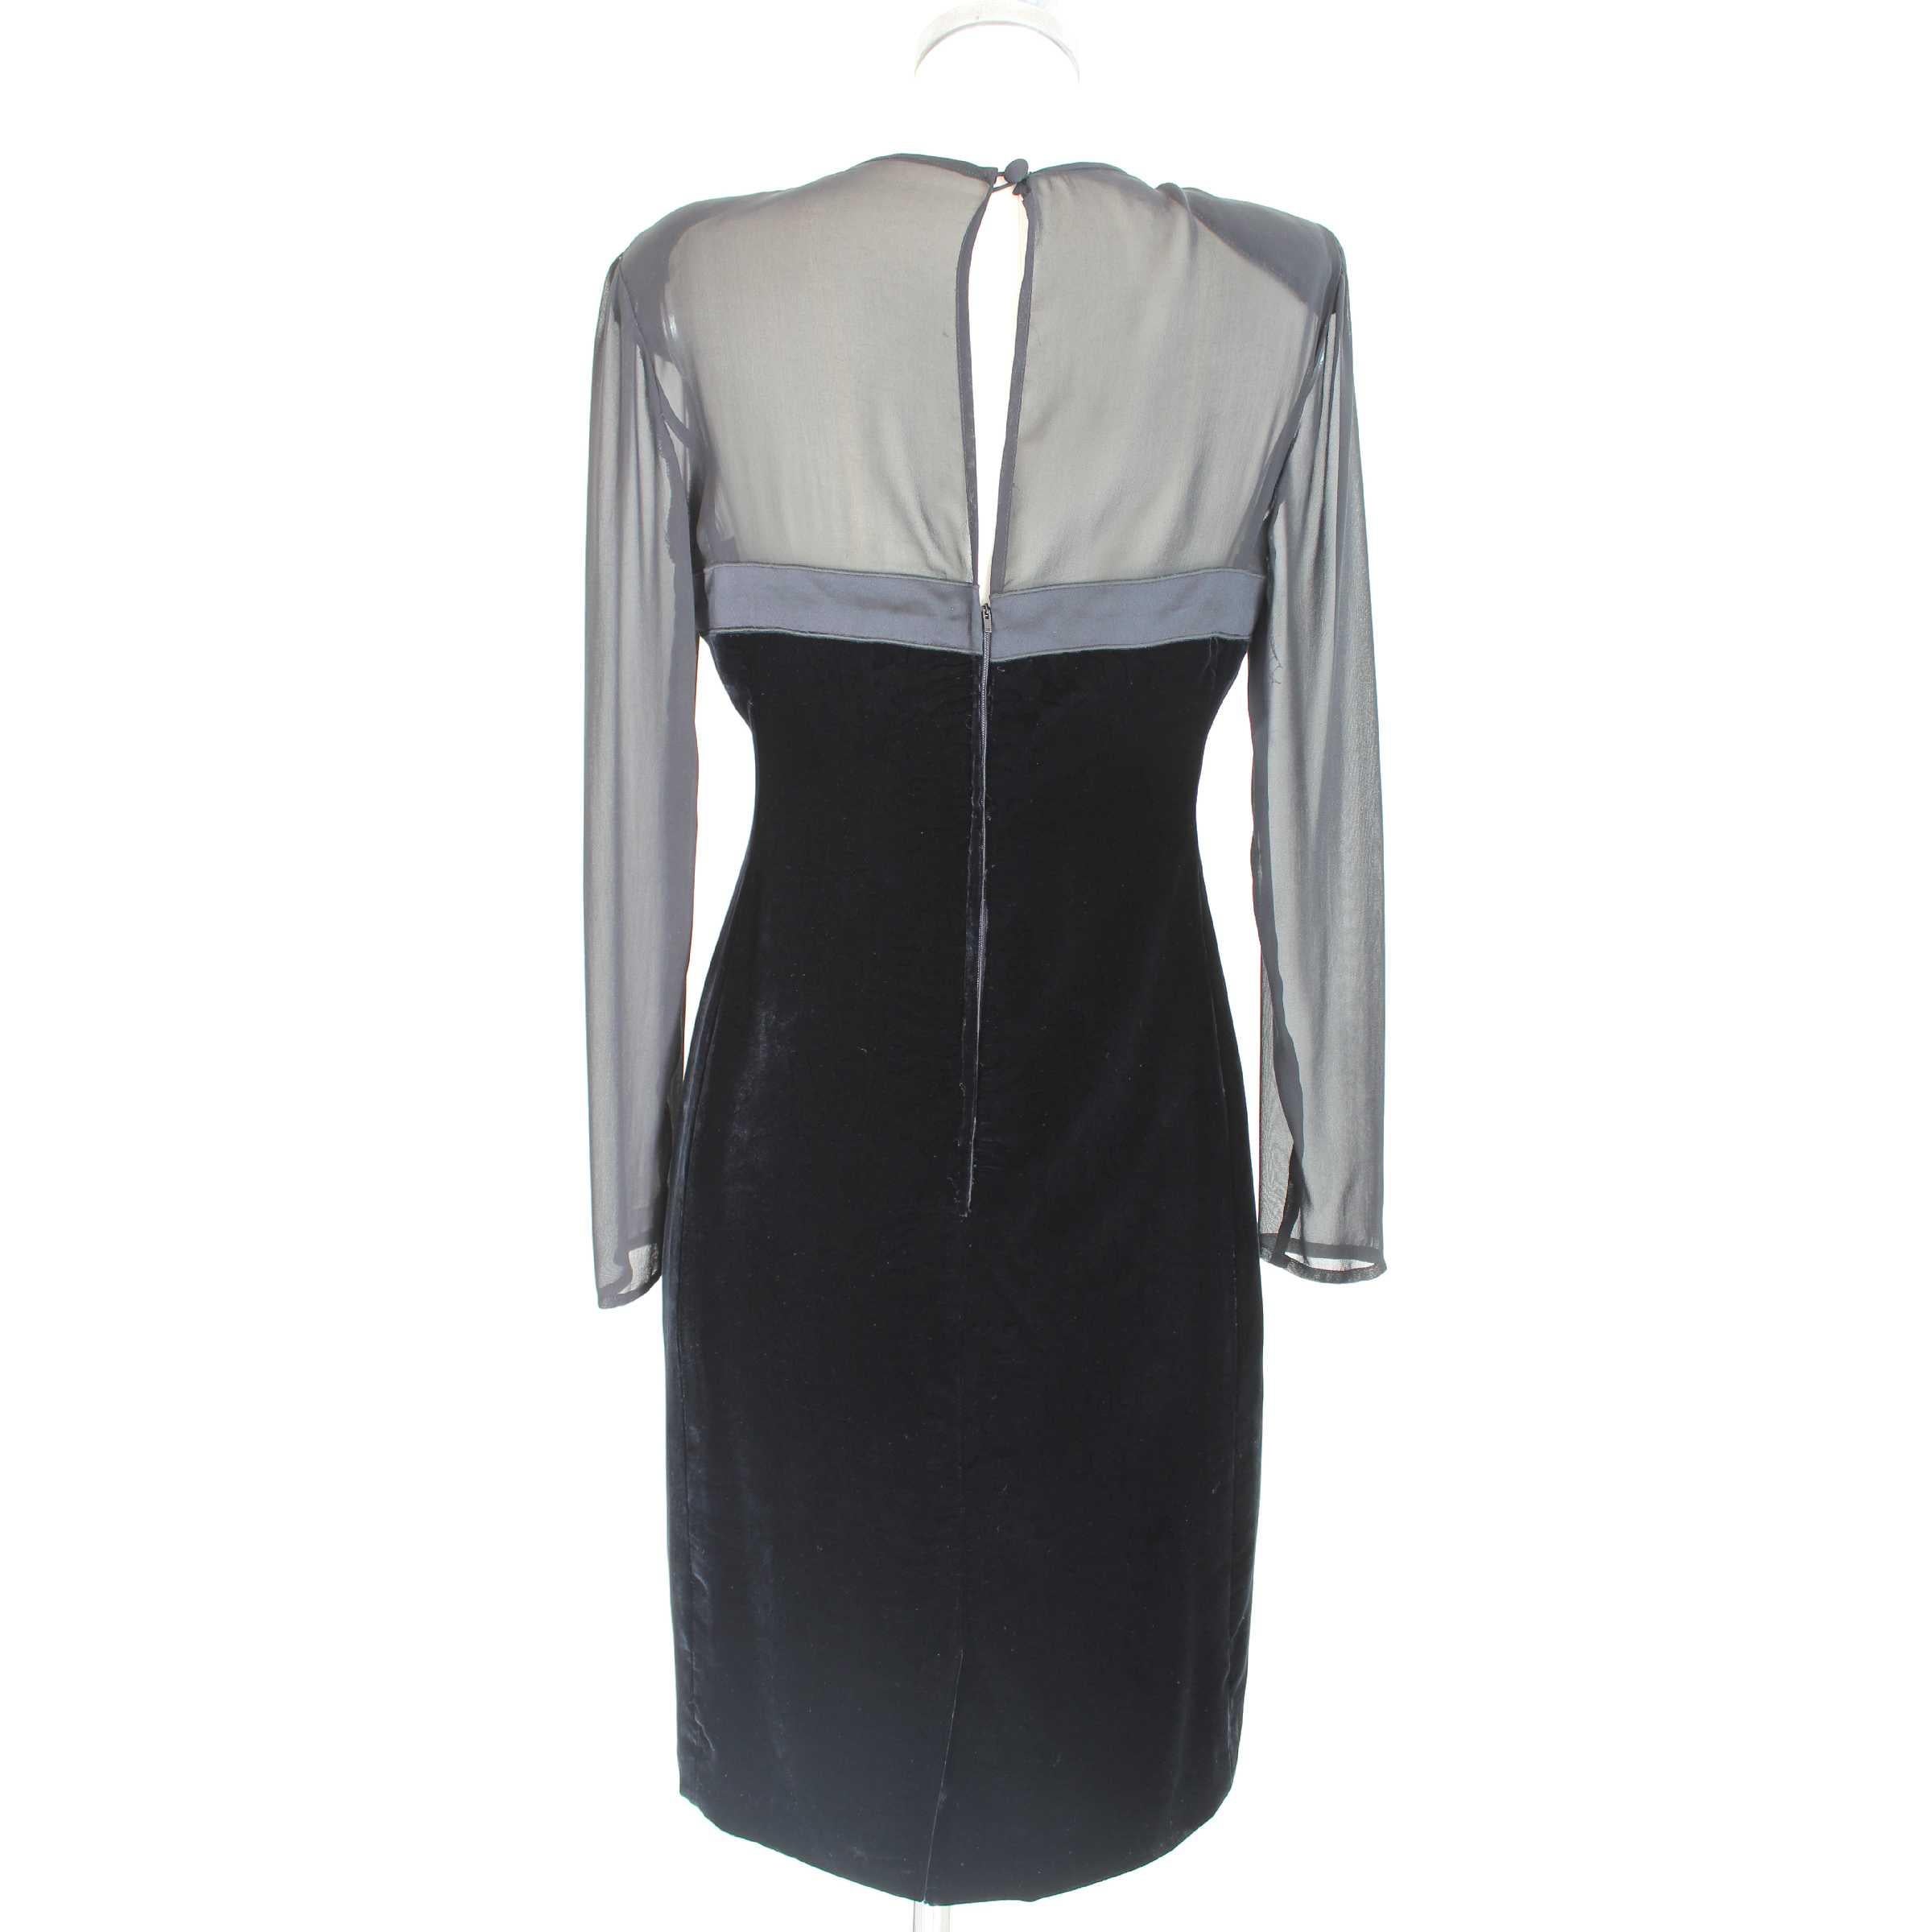 Valentino 90s vintage dress in silk and velvet, black with transparent sleeves and shoulders. Elegant long evening dress made in Italy, the velvet part has raised wefts that change in correspondence to the light. Excellent vintage conditions

Size